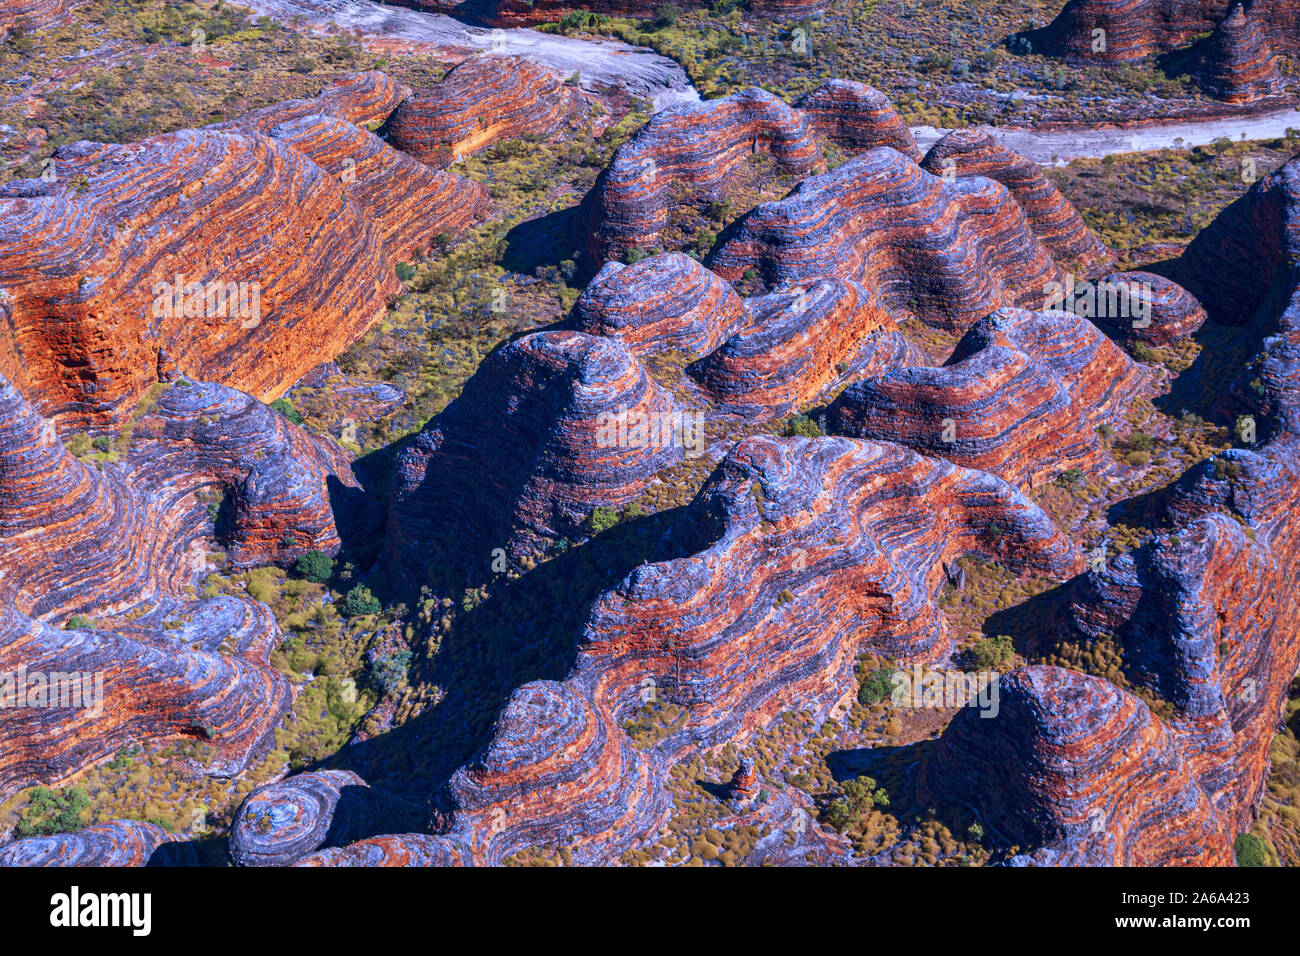 Aerial view of the beehive like  colourful sandstone formations of the Bungle Bungles, Purnululu National Park, Kimberley, Australia Stock Photo